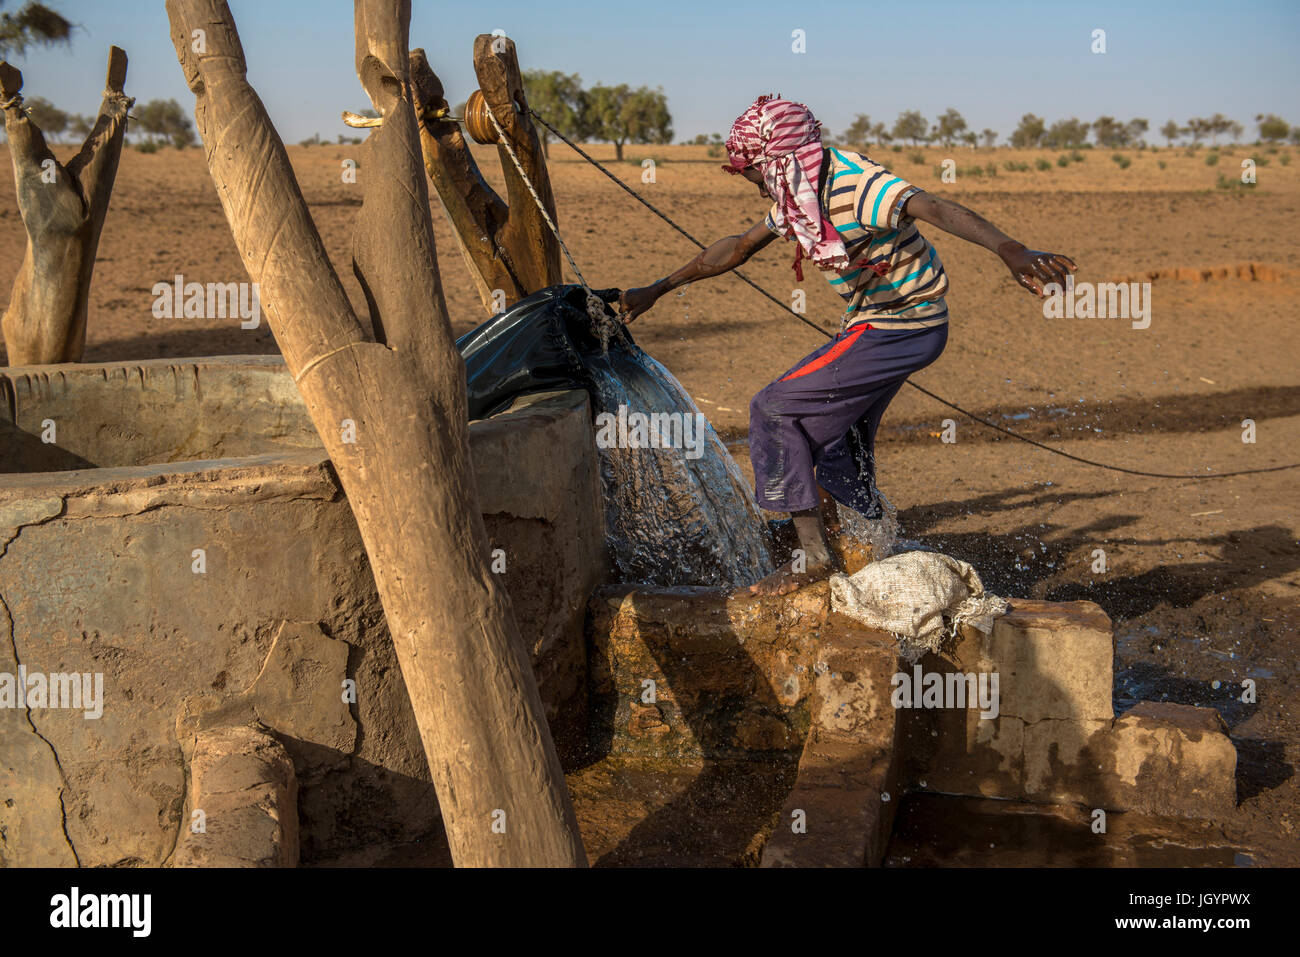 Peul boy fetching water from a well. Senegal. Stock Photo